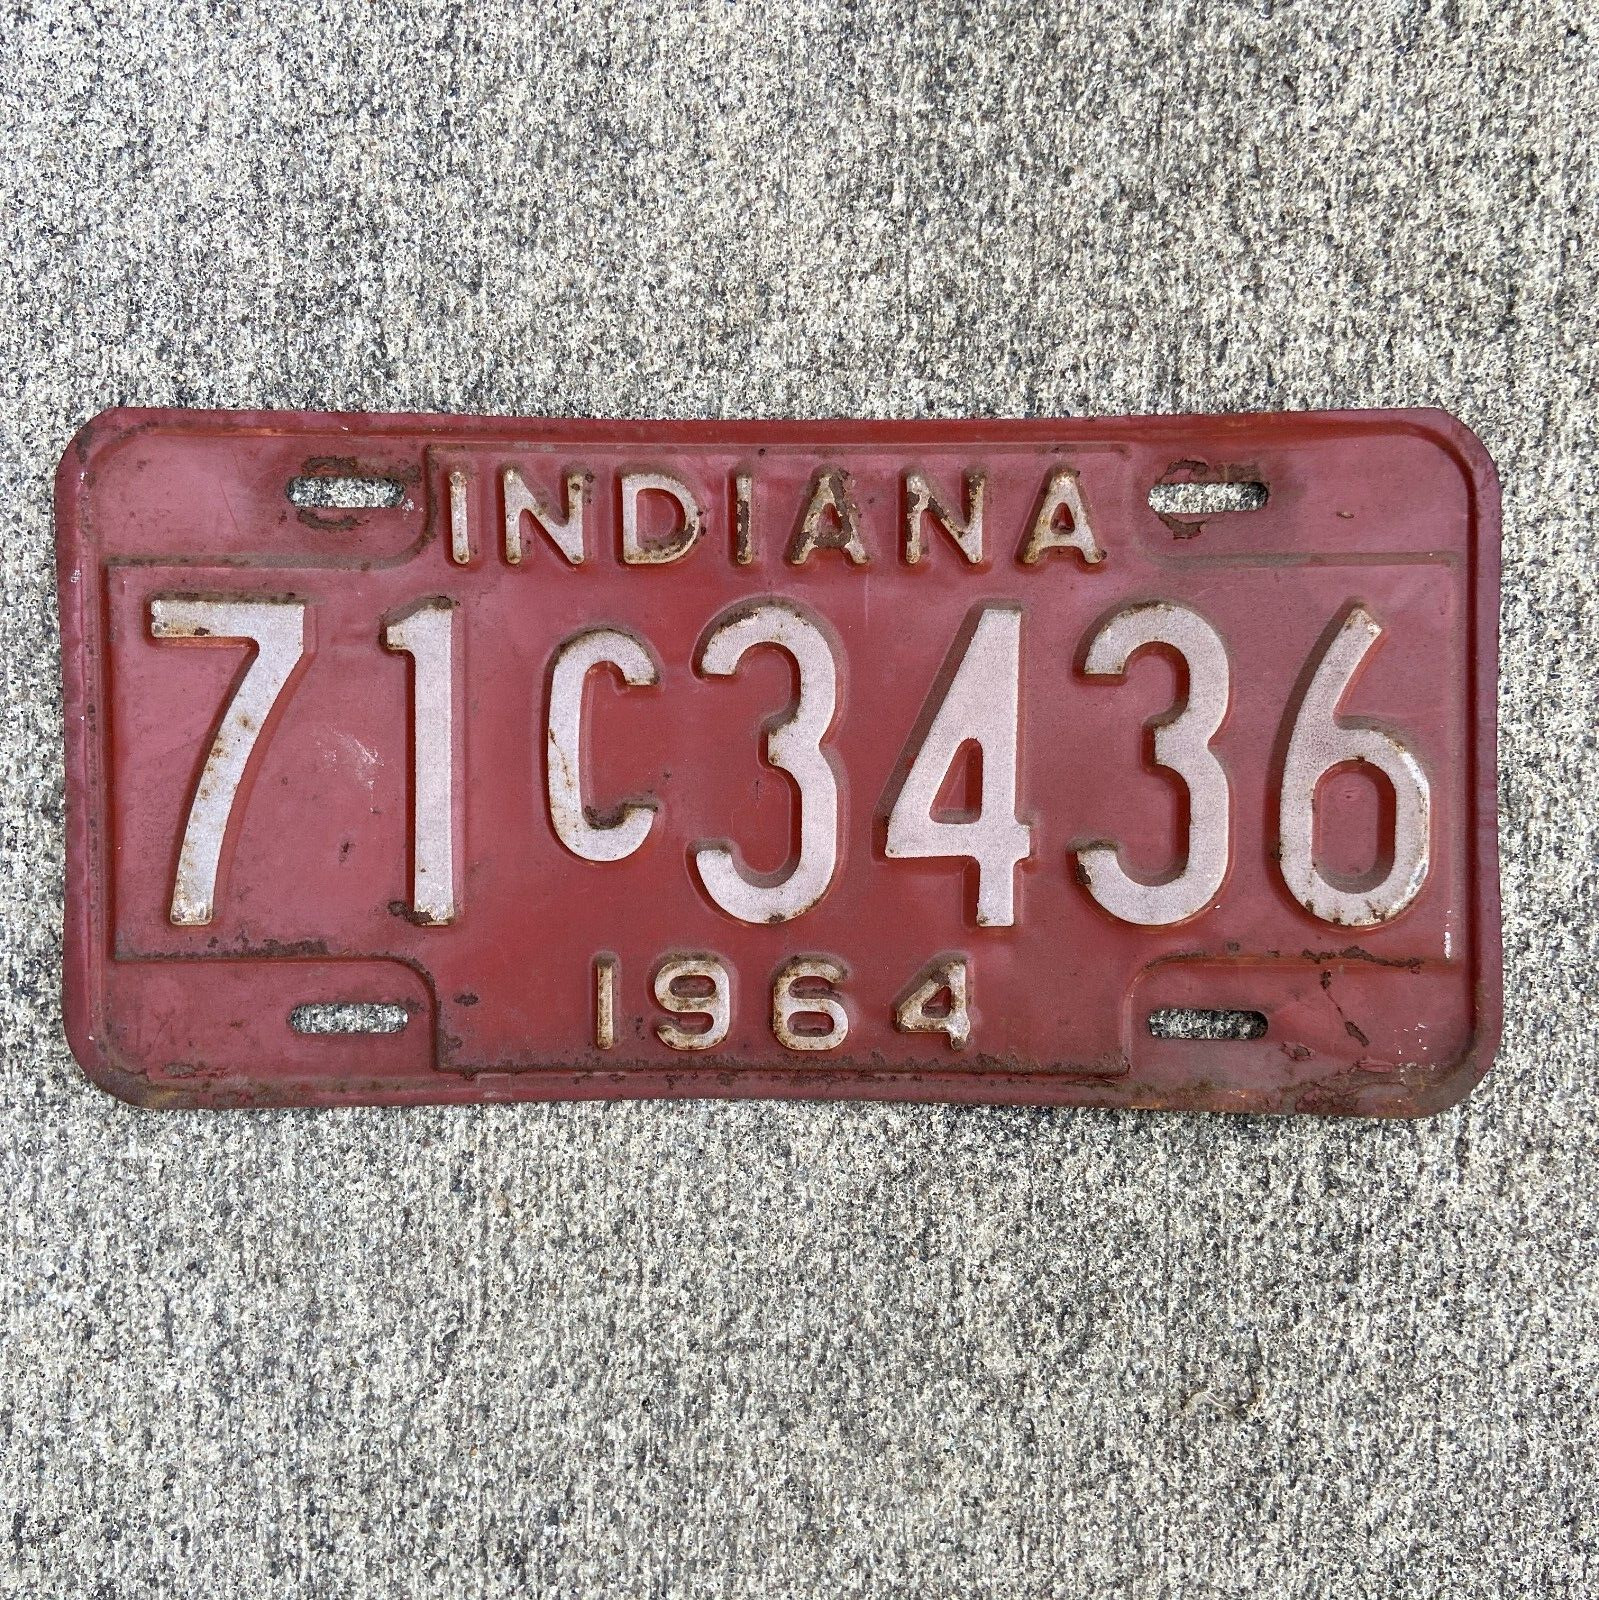 Vintage 1964 Indiana License Plate 71 C 3436 Red White IND-64